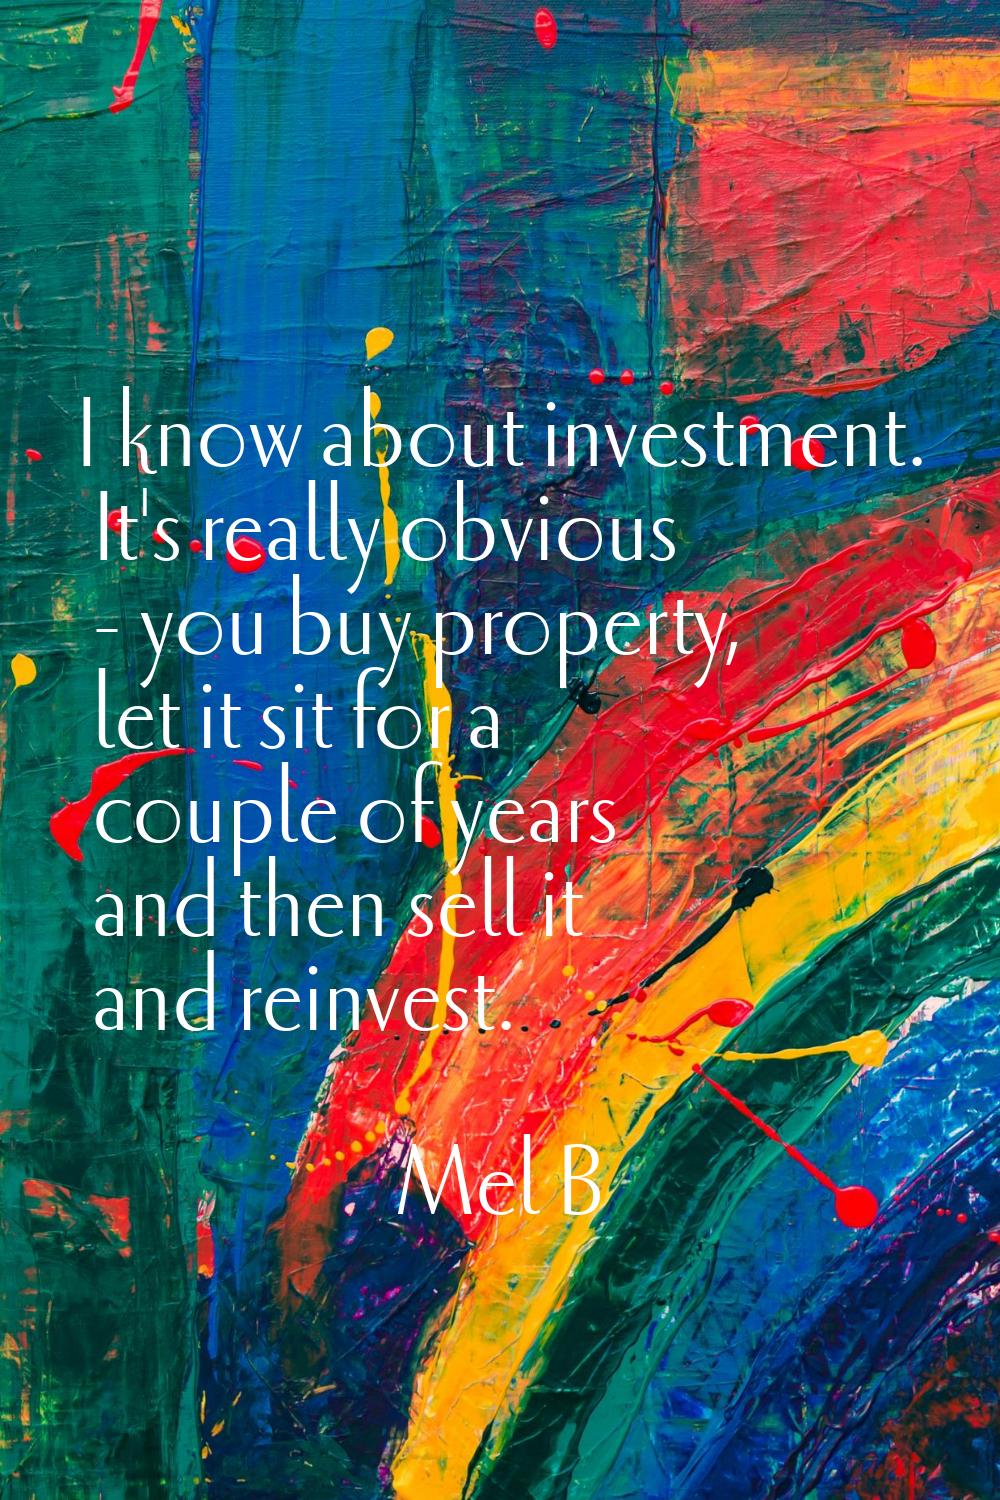 I know about investment. It's really obvious - you buy property, let it sit for a couple of years a